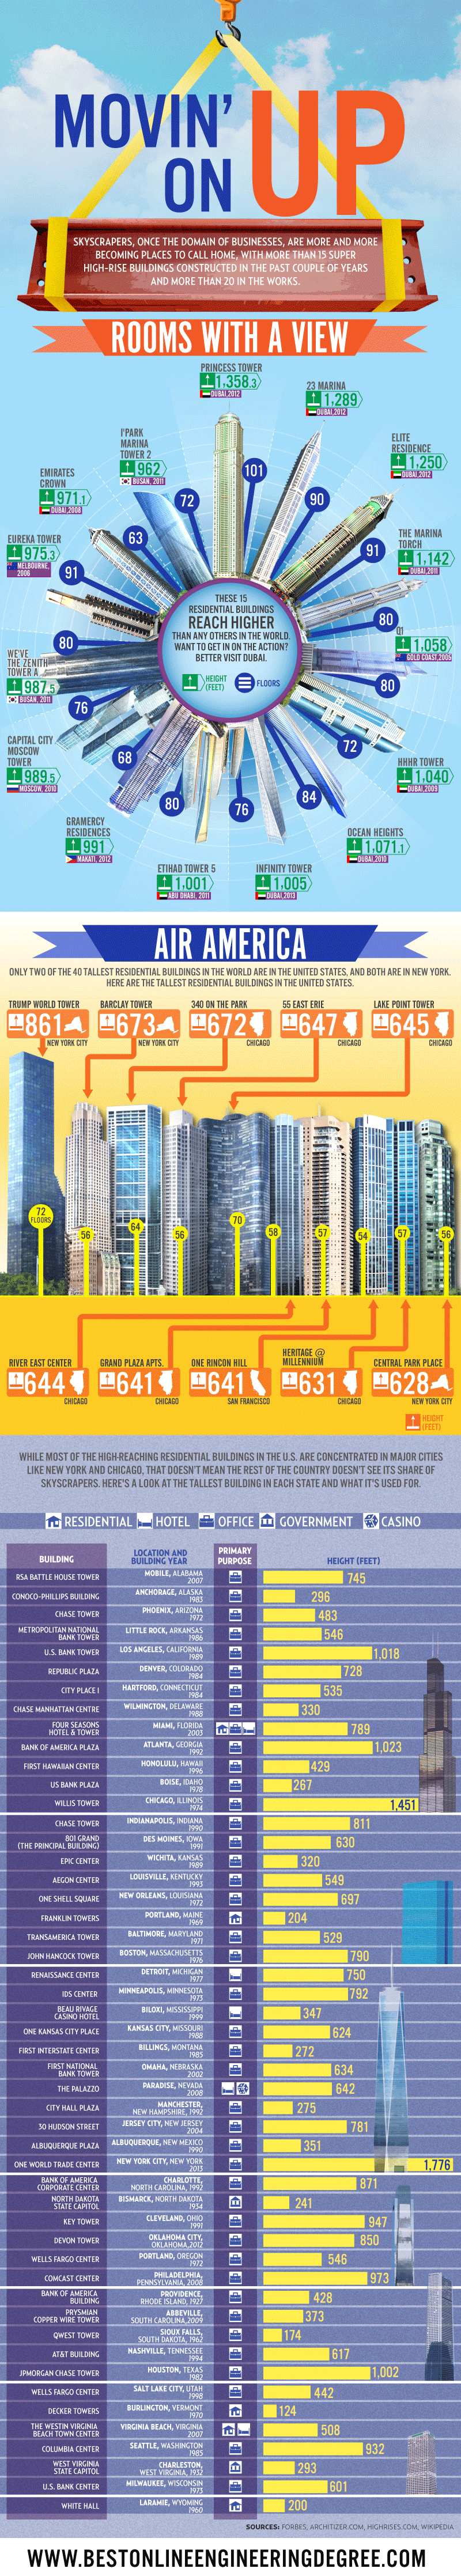 Movin On Up: World's Tallest Buildings [Infographic]